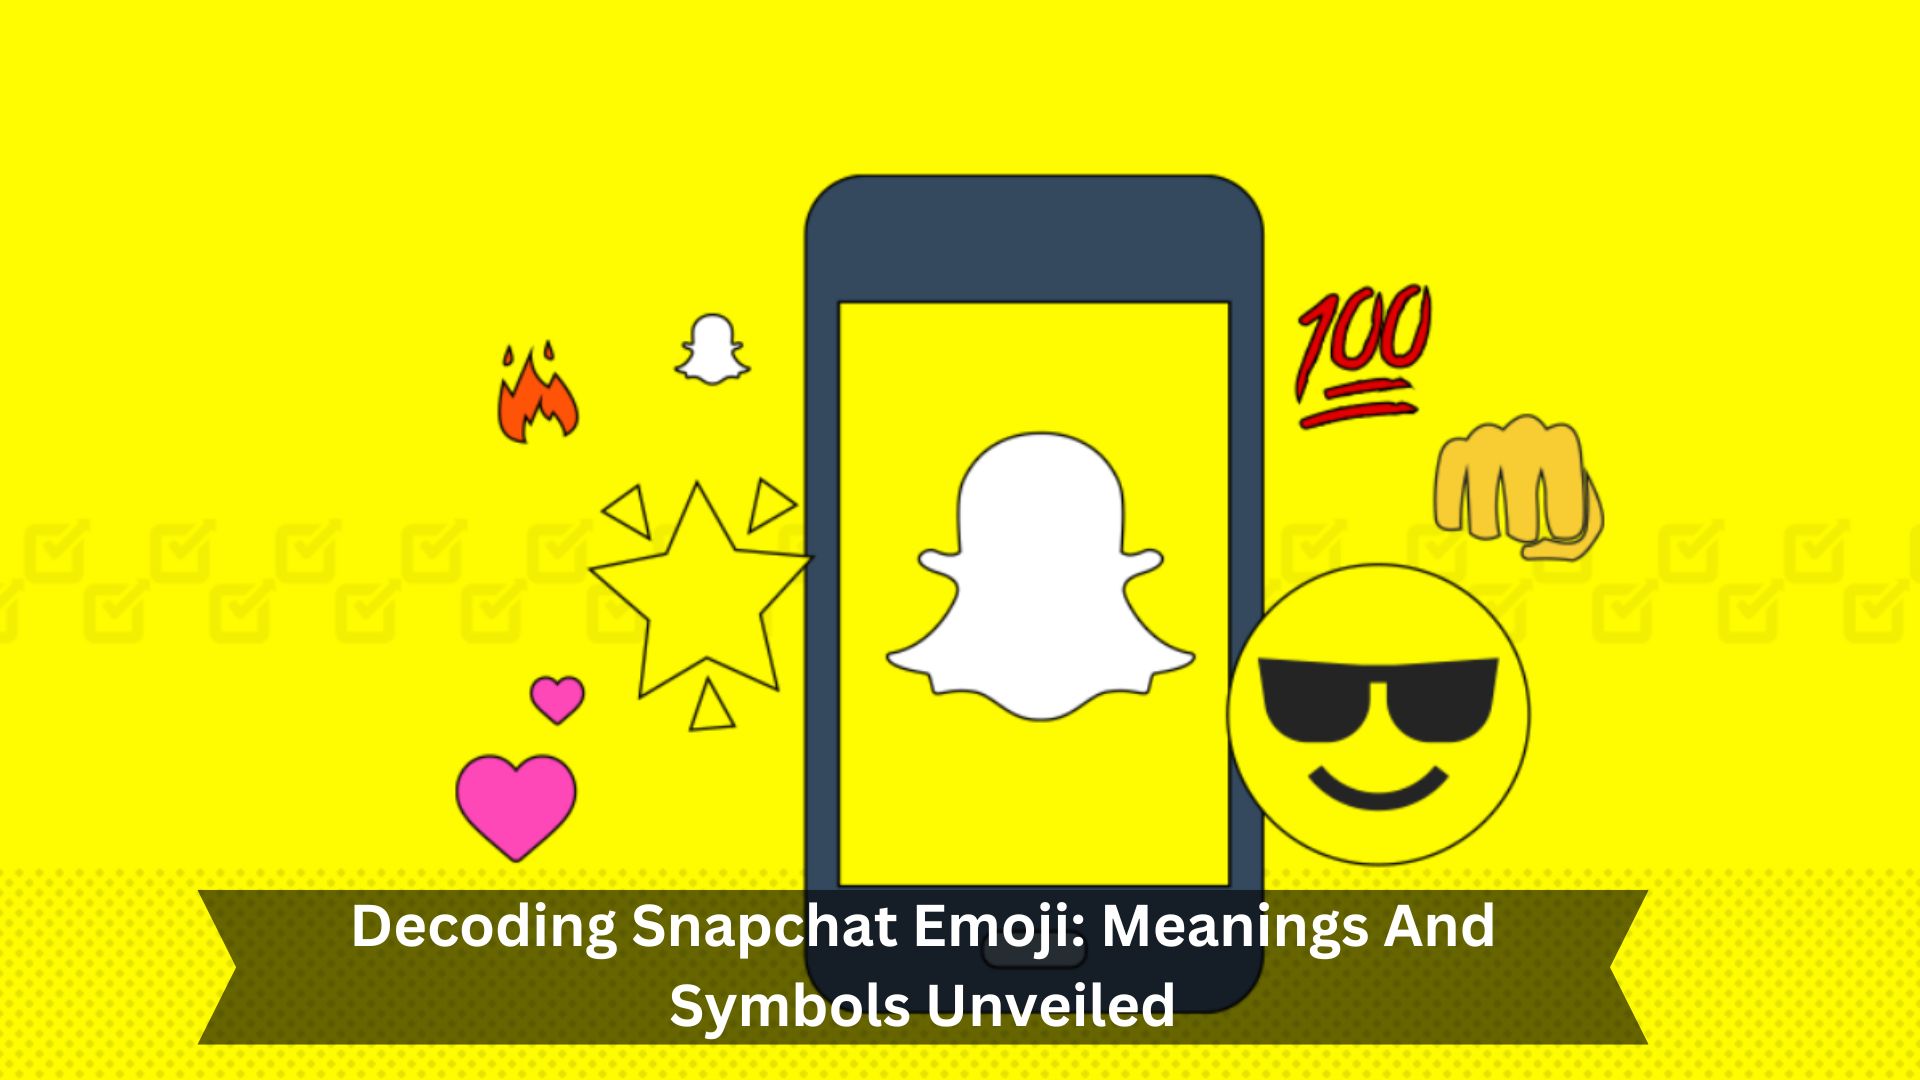 Decoding-Snapchat-Emoji-Meanings-And-Symbols-Unveiled